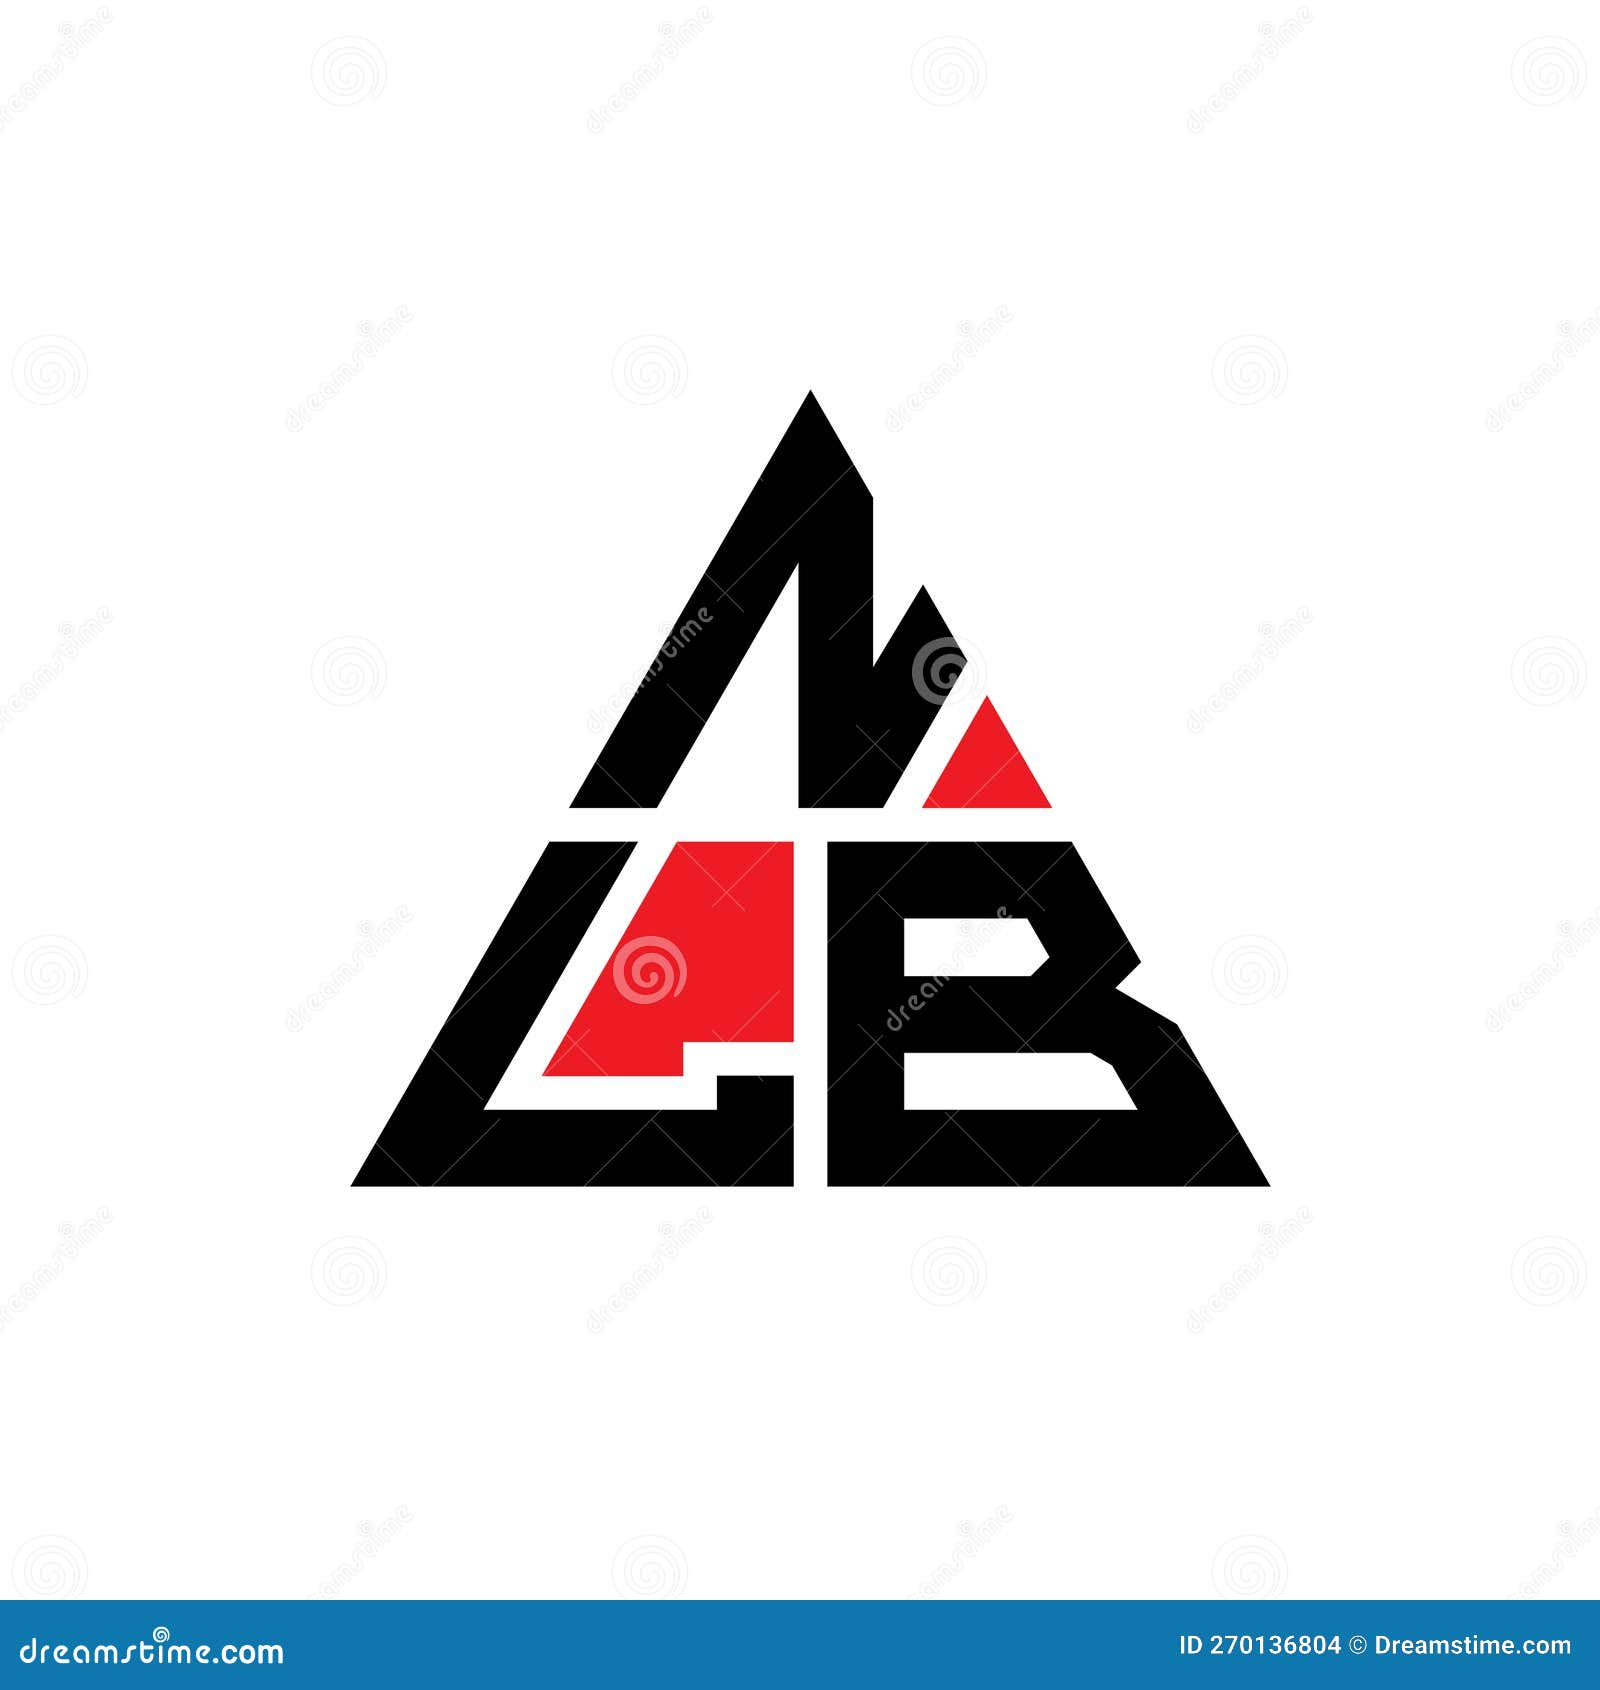 NLB Triangle Letter Logo Design with Triangle Shape. NLB Triangle Logo  Design Monogram Stock Vector - Illustration of icon, shield: 270136804